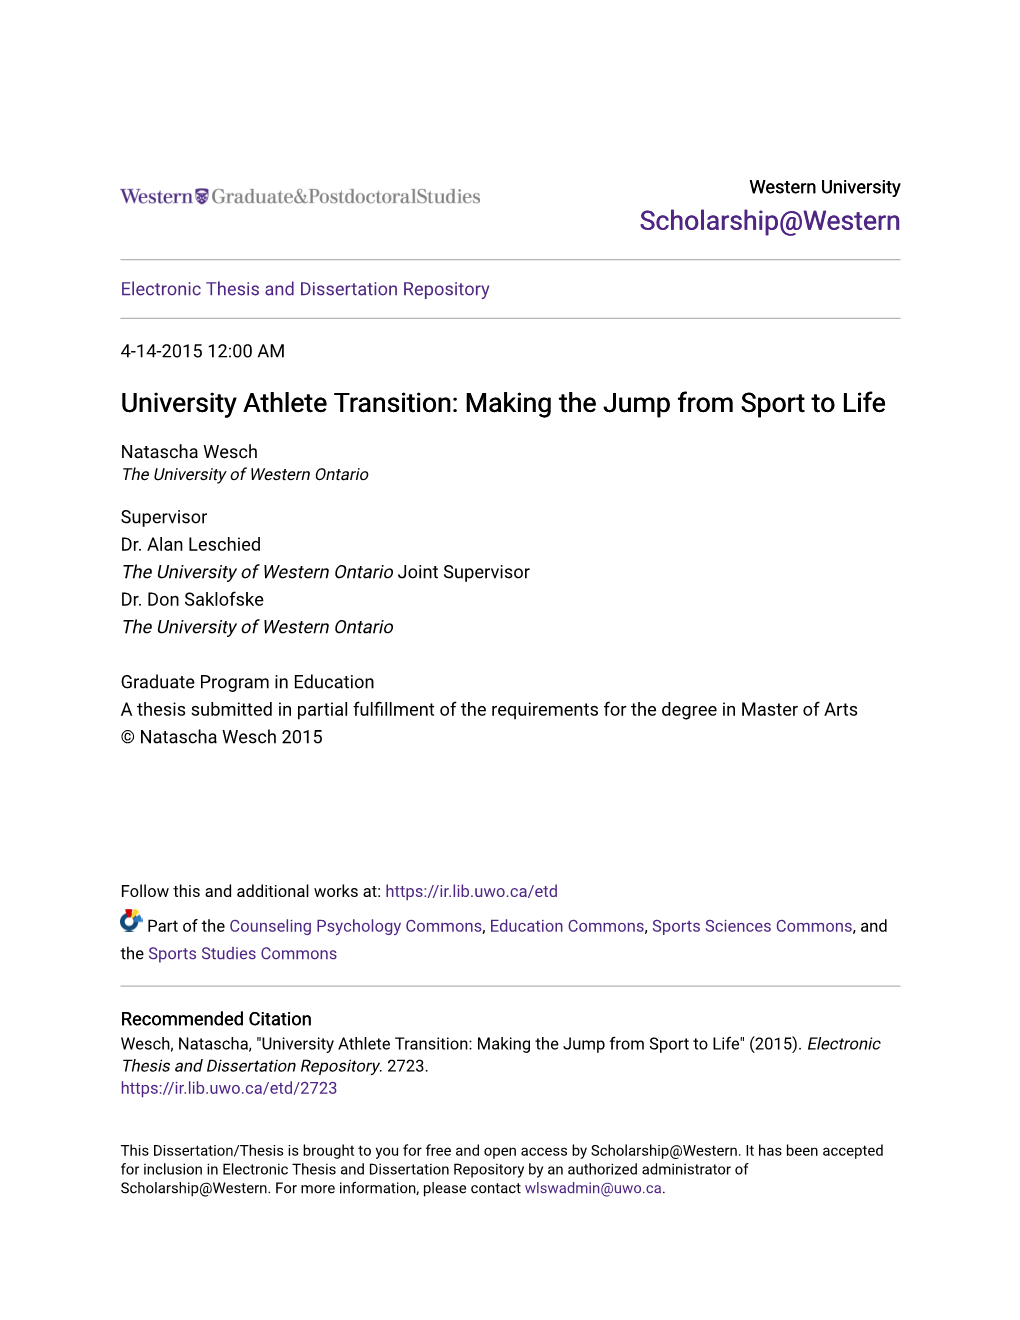 University Athlete Transition: Making the Jump from Sport to Life